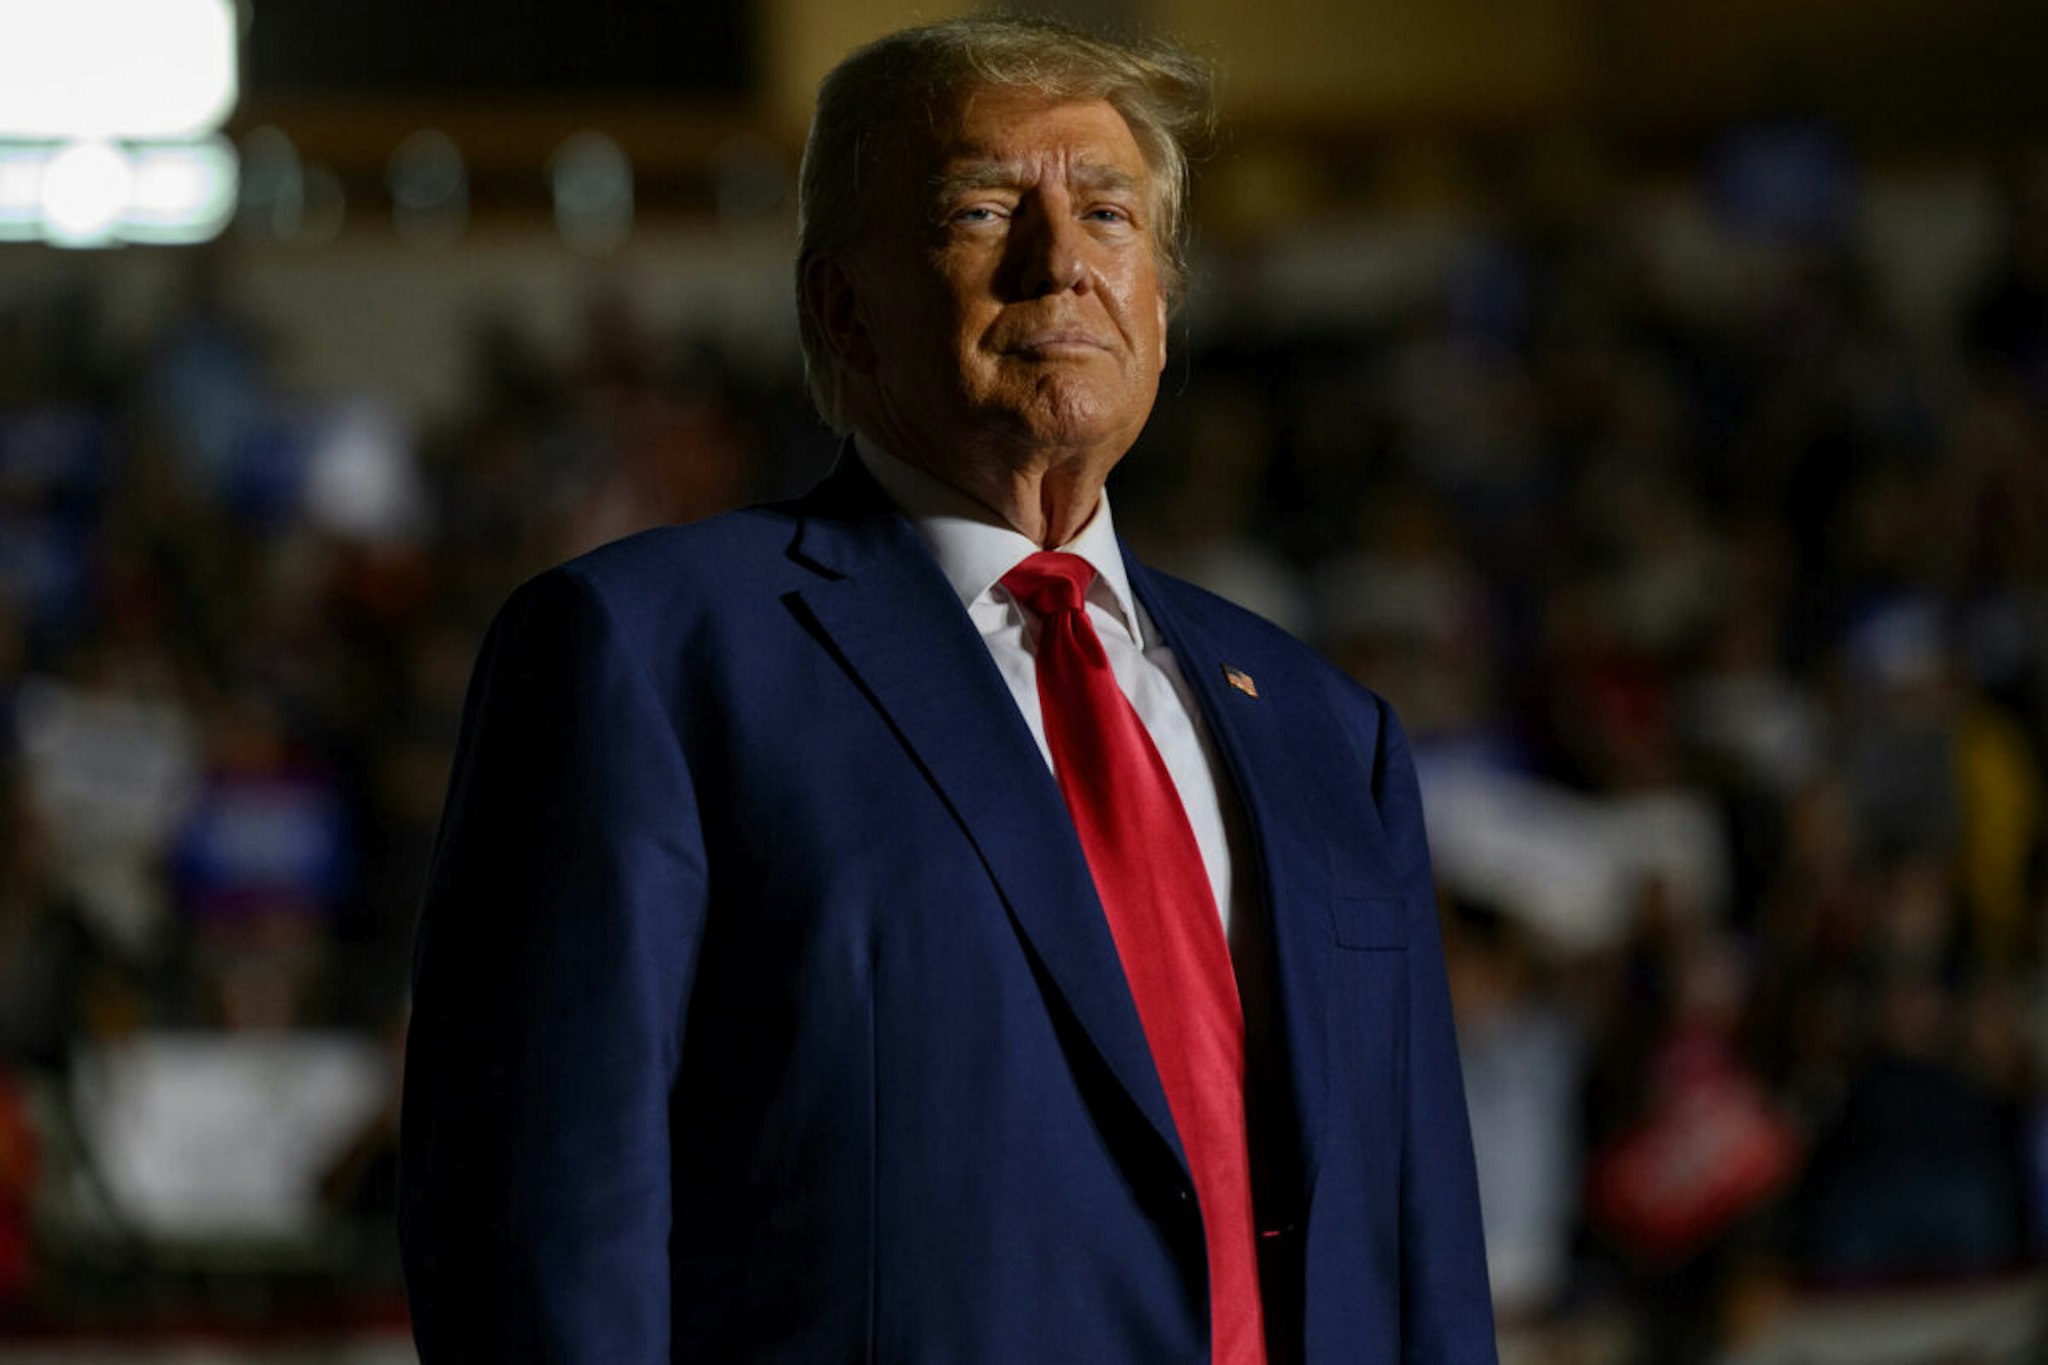 ERIE, PENNSYLVANIA - JULY 29: Former U.S. President Donald Trump enters Erie Insurance Arena for a political rally while campaigning for the GOP nomination in the 2024 election on July 29, 2023 in Erie, Pennsylvania.